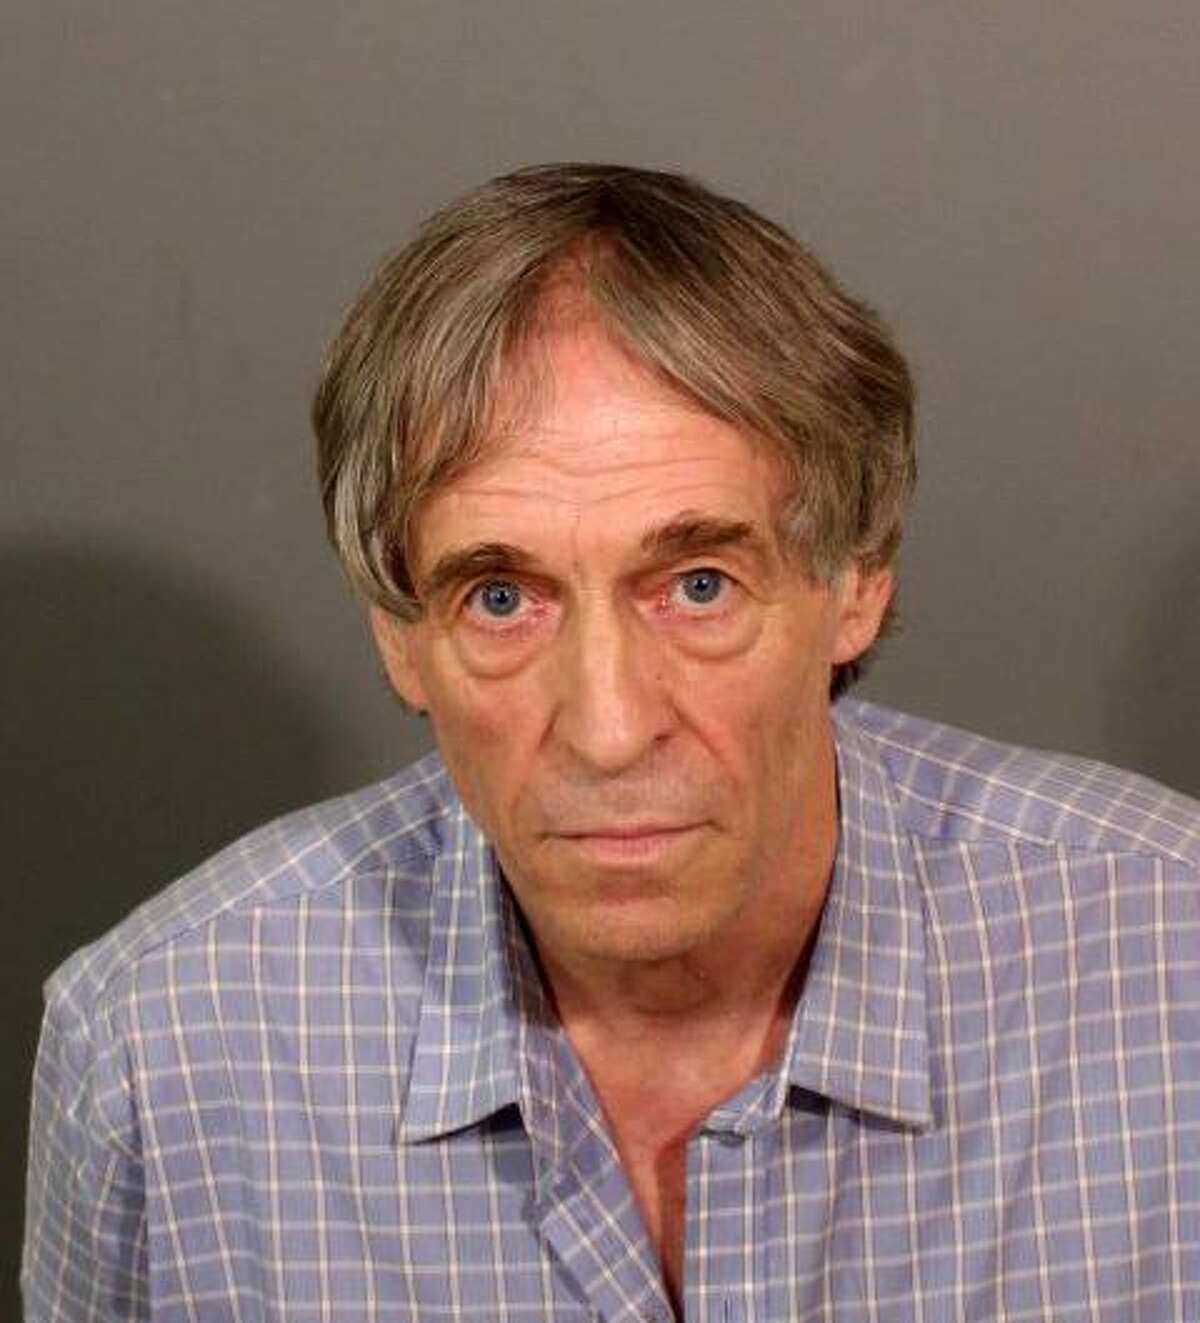 Bruce J. Bemer of Glastonbury, Conn. was arrested in connection with a human trafficking ring based in Danbury.